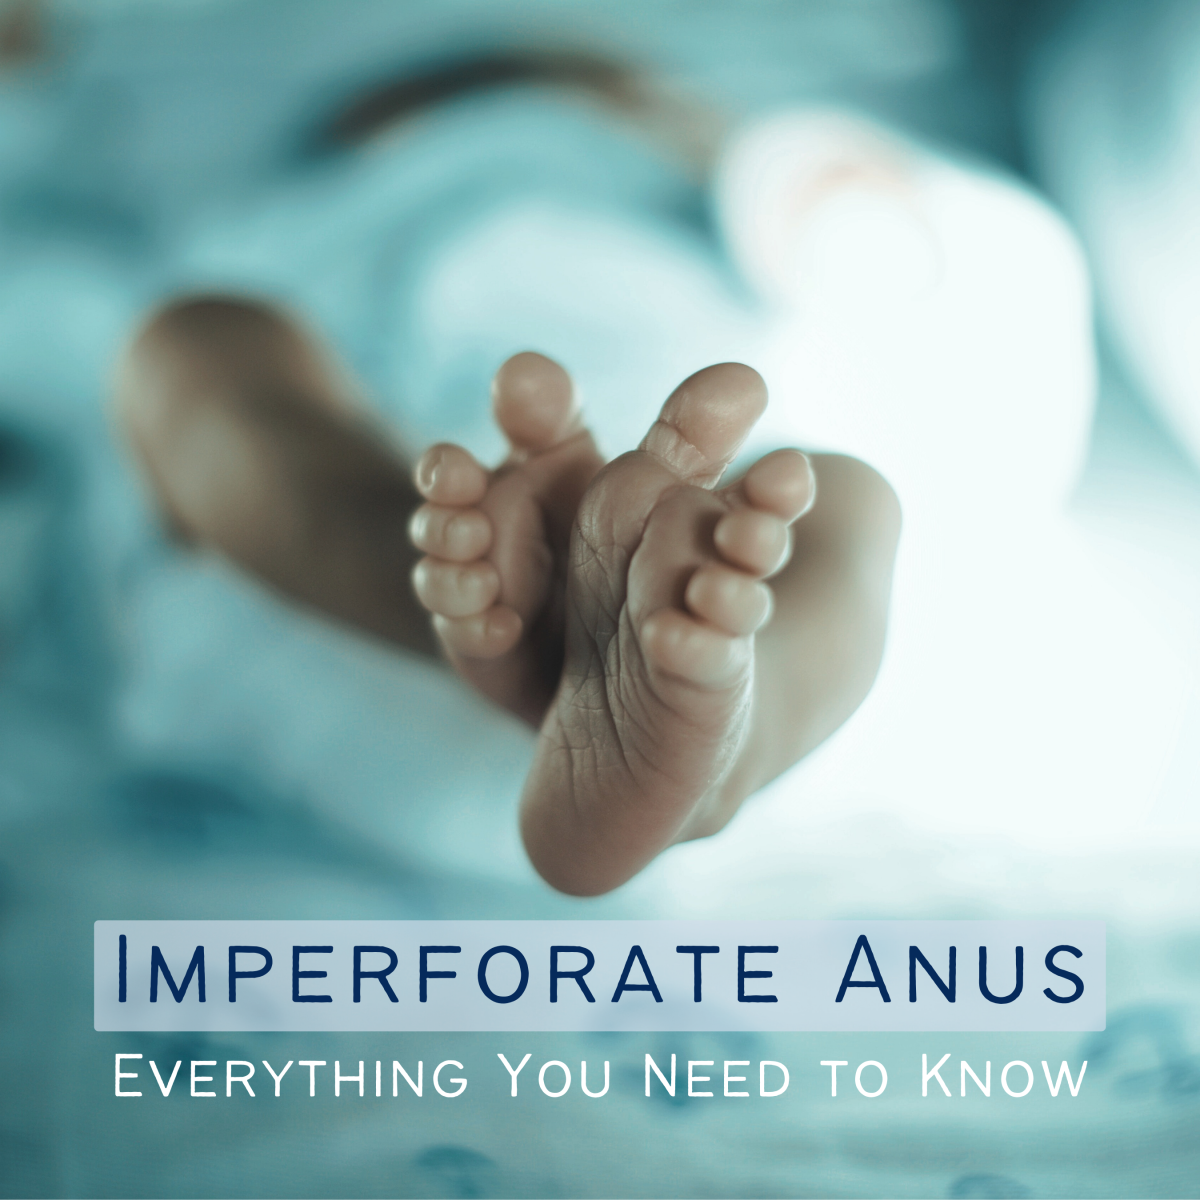 Beby Girl Xxx - When Your Baby Has an Imperforate Anus - WeHaveKids